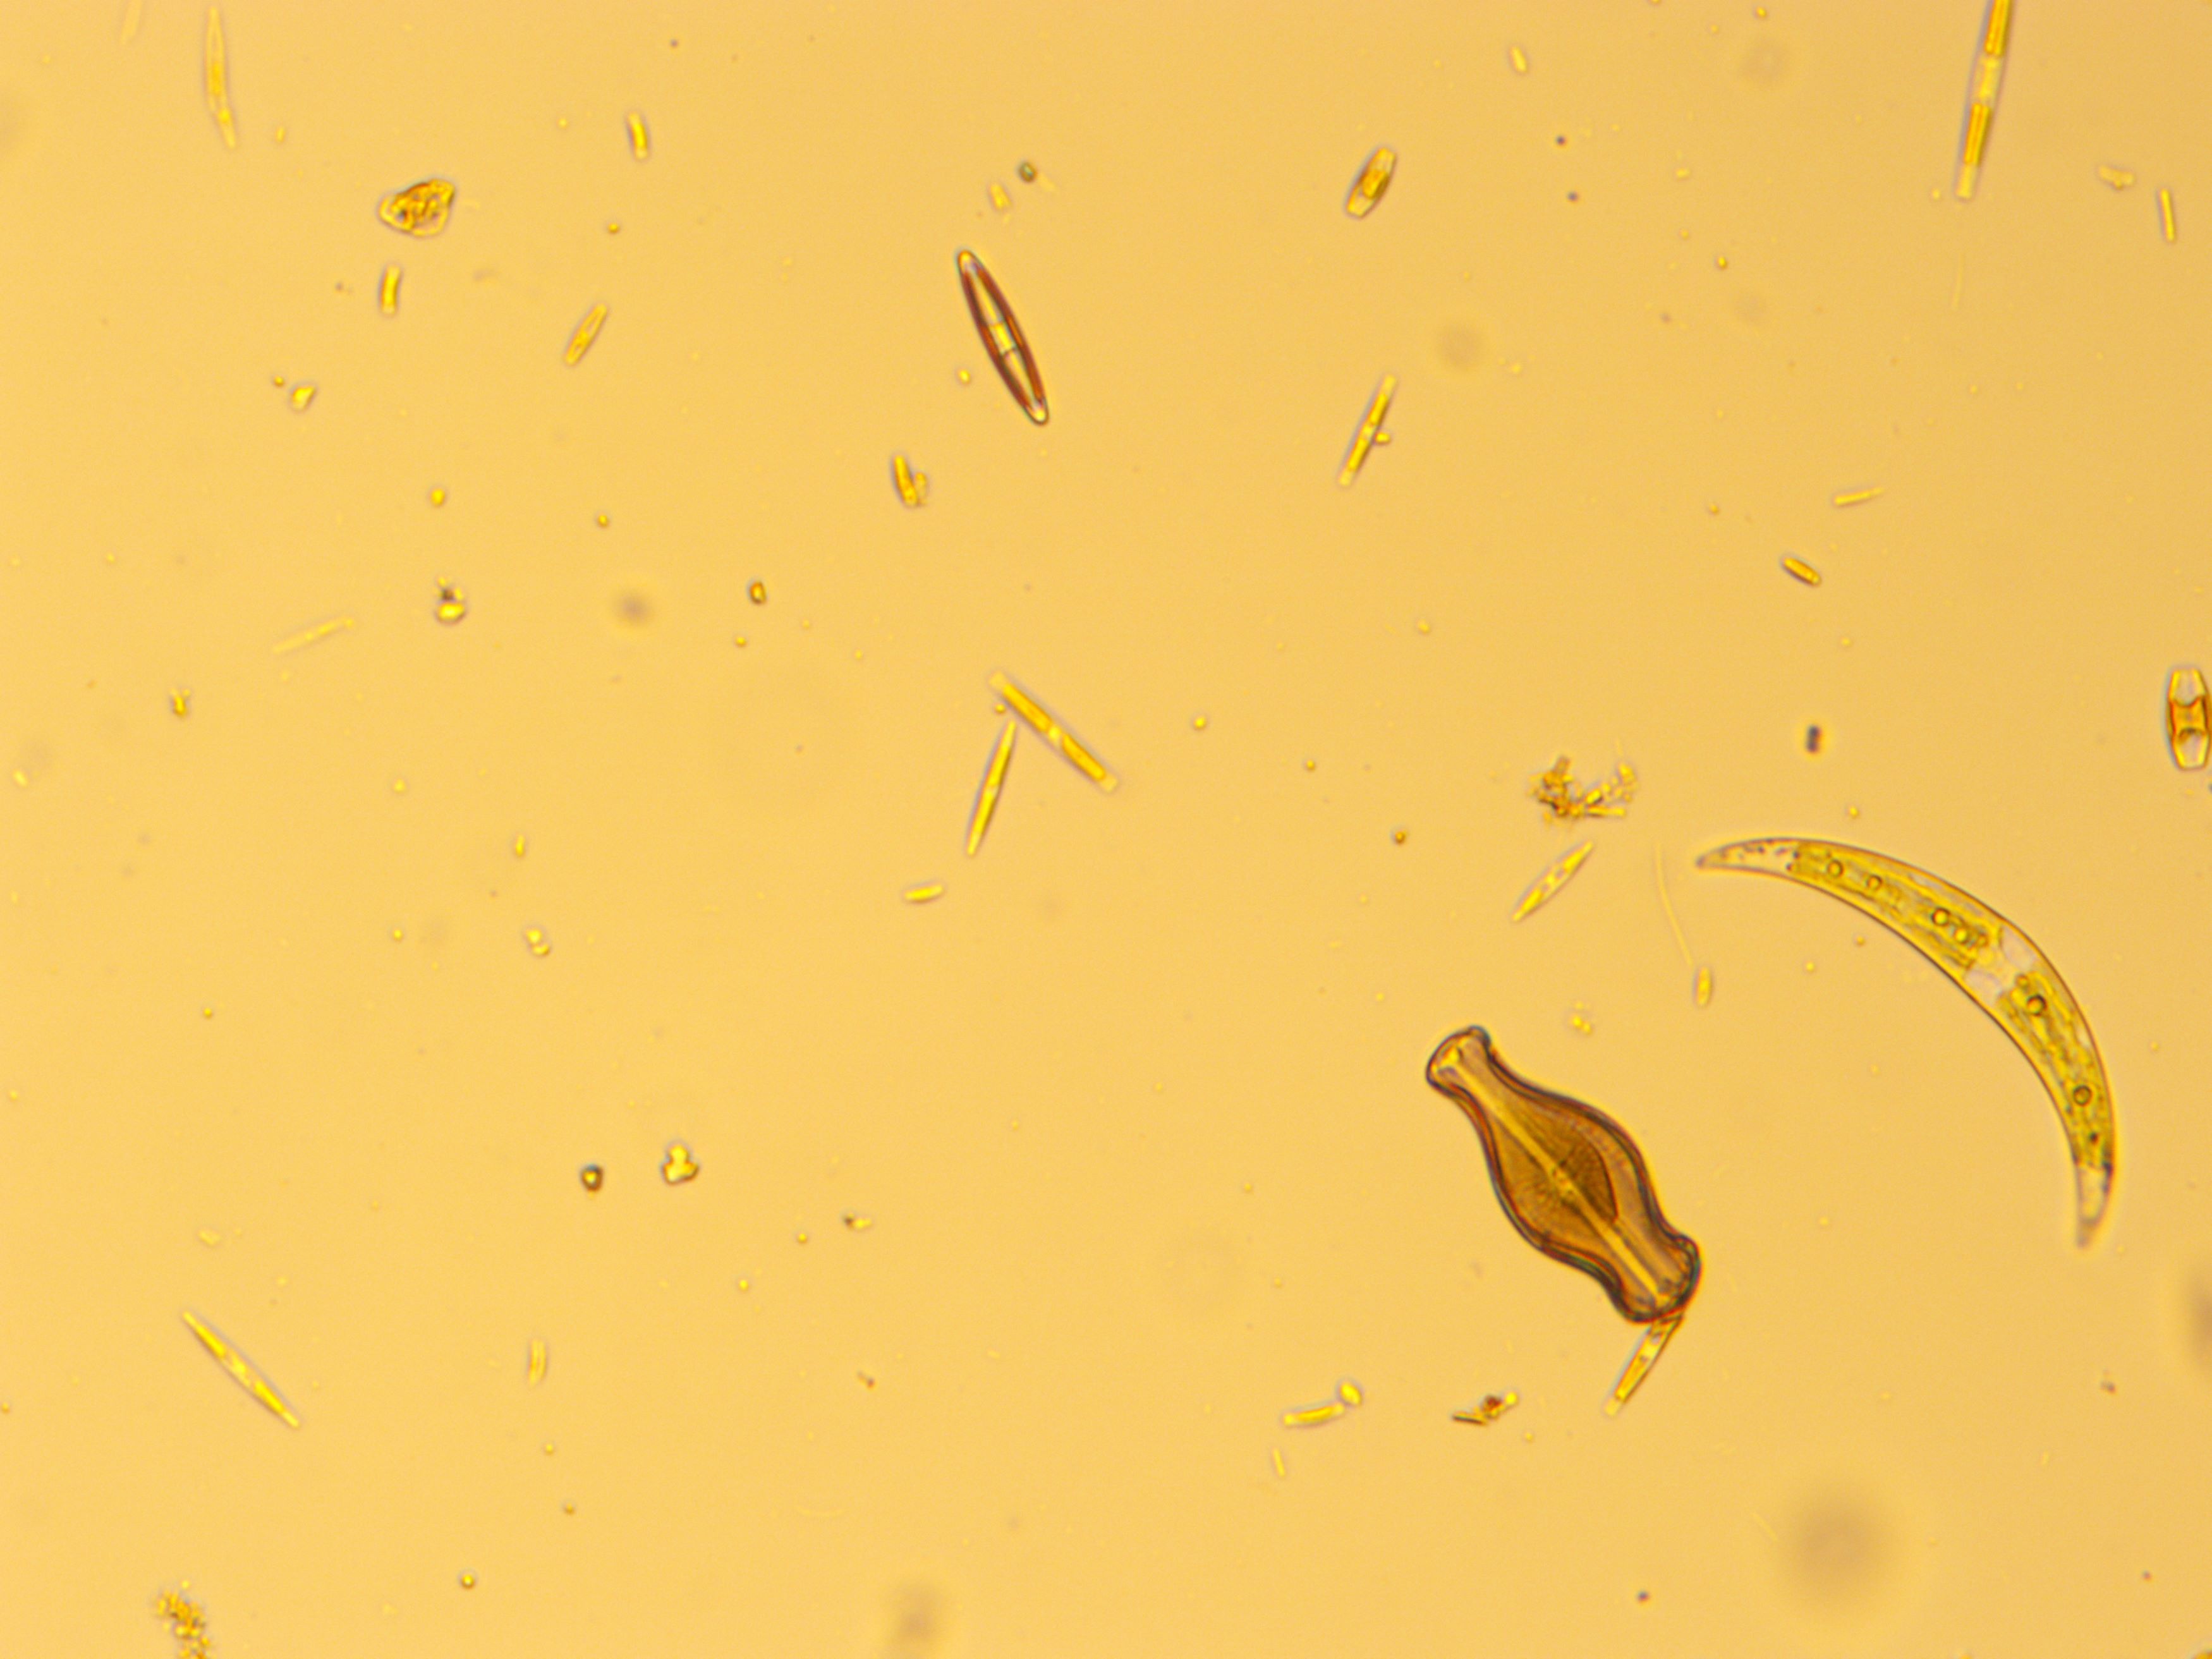 Magnification of a didymo cell (bottom right), evident by its “coke bottle” shape, from a Parmalee Canoe Launch access site sample.